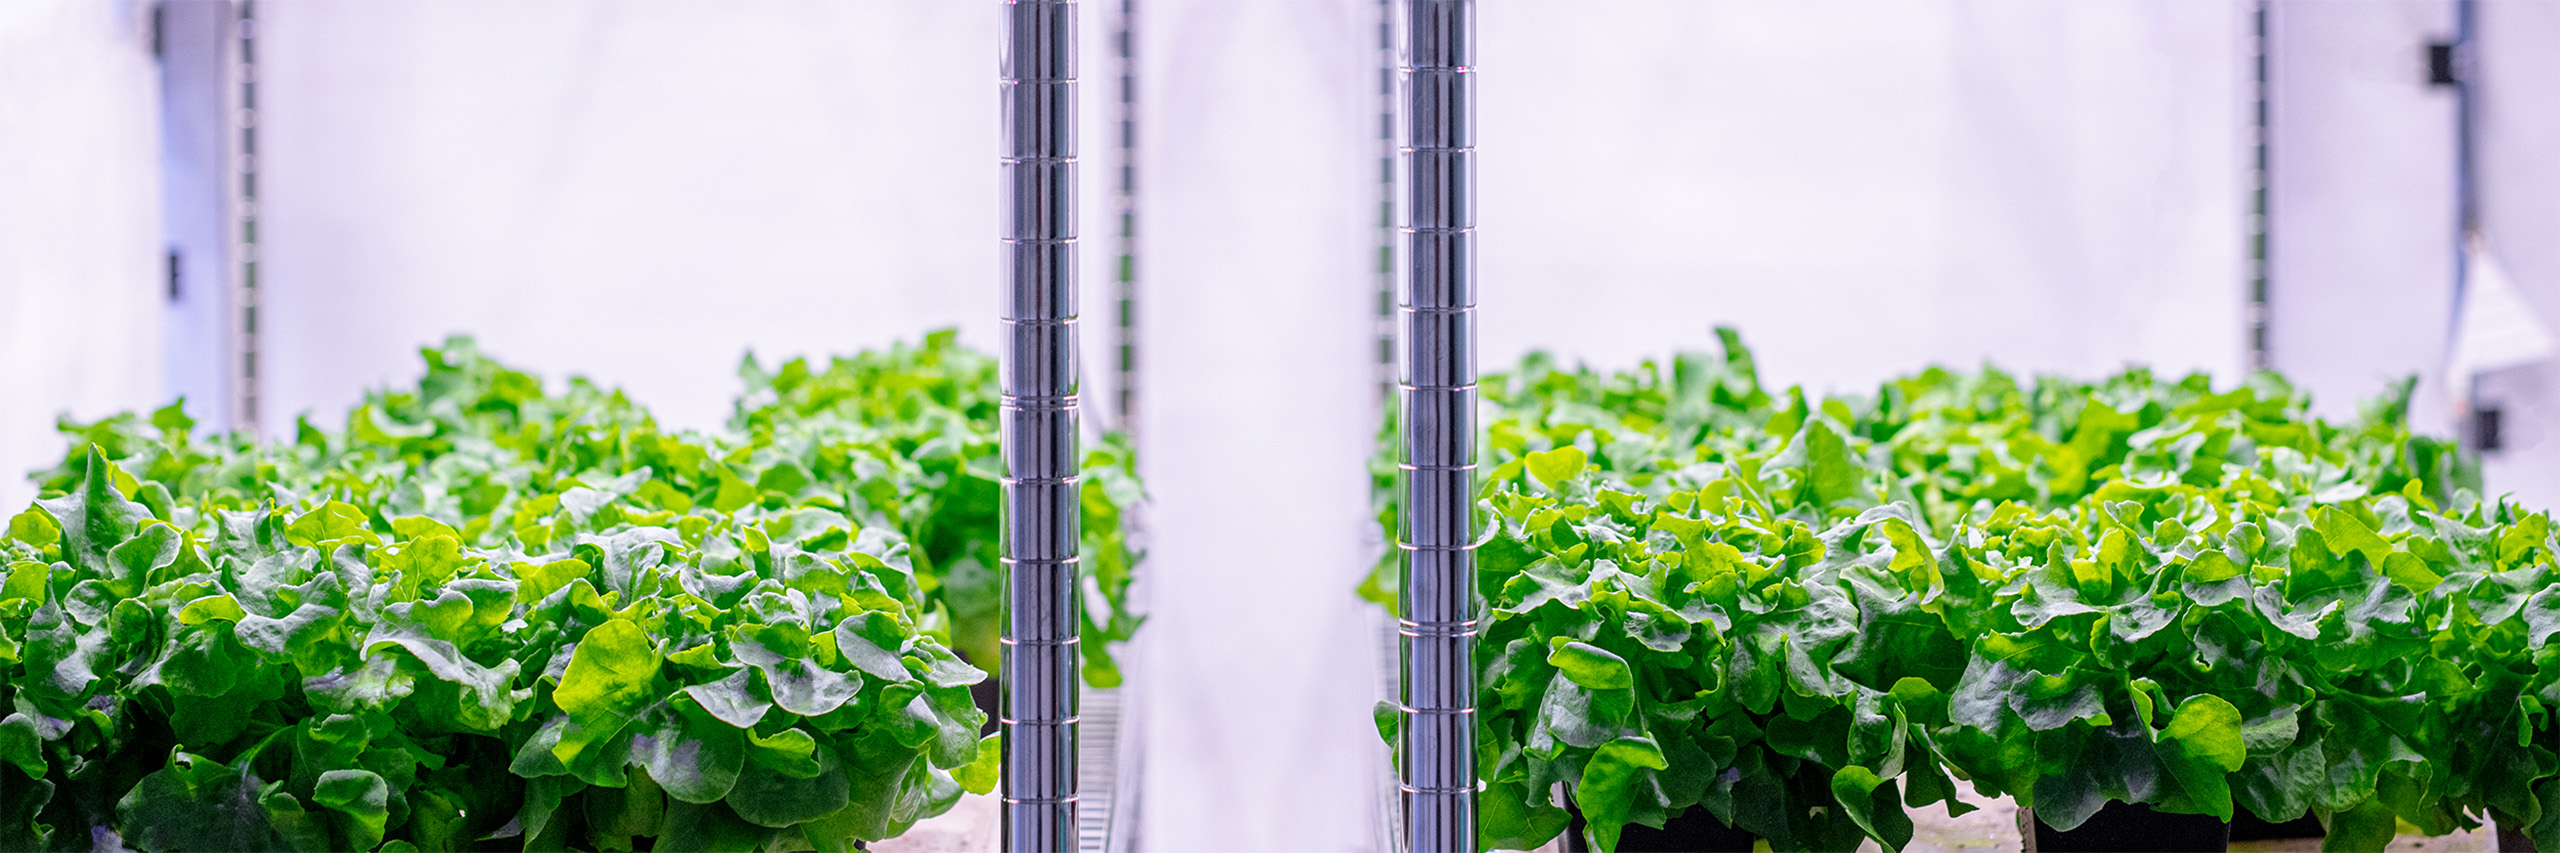 how-vertical-farming-can-change-the-way-we-look-at-food-production